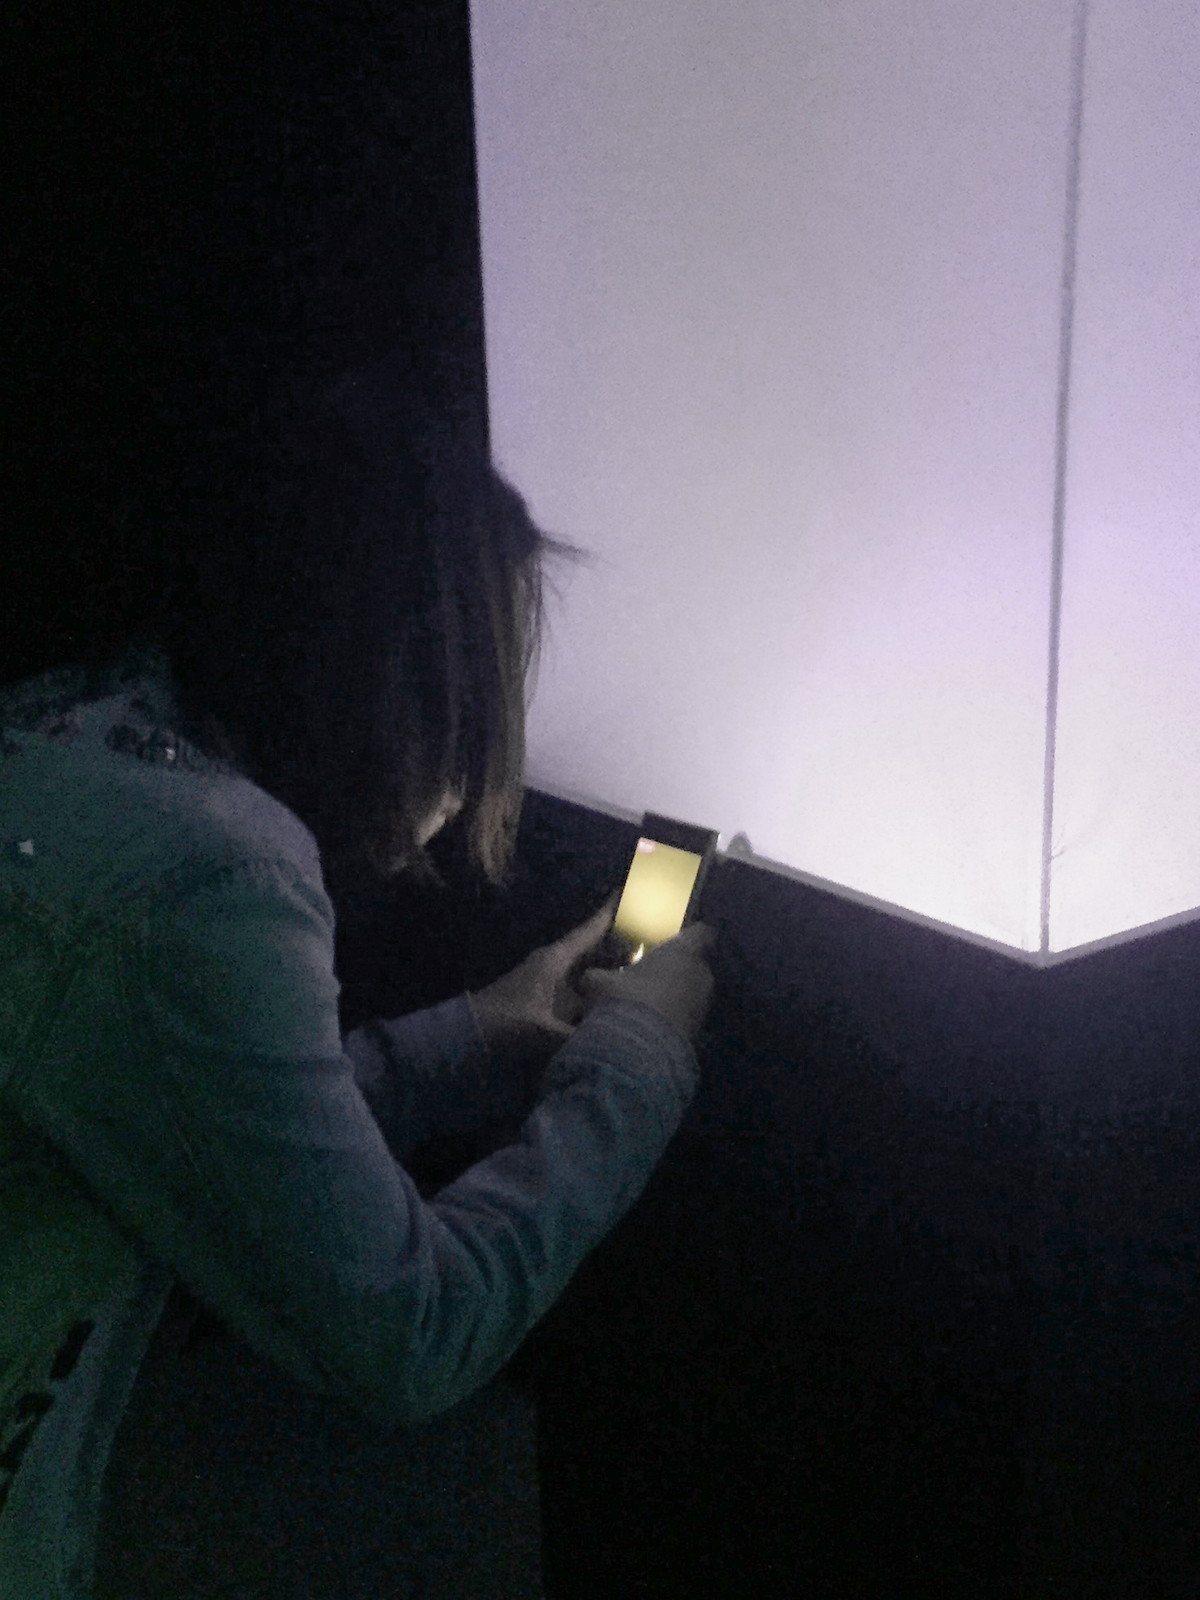 A girl holding a phone very closely to the glowing cube